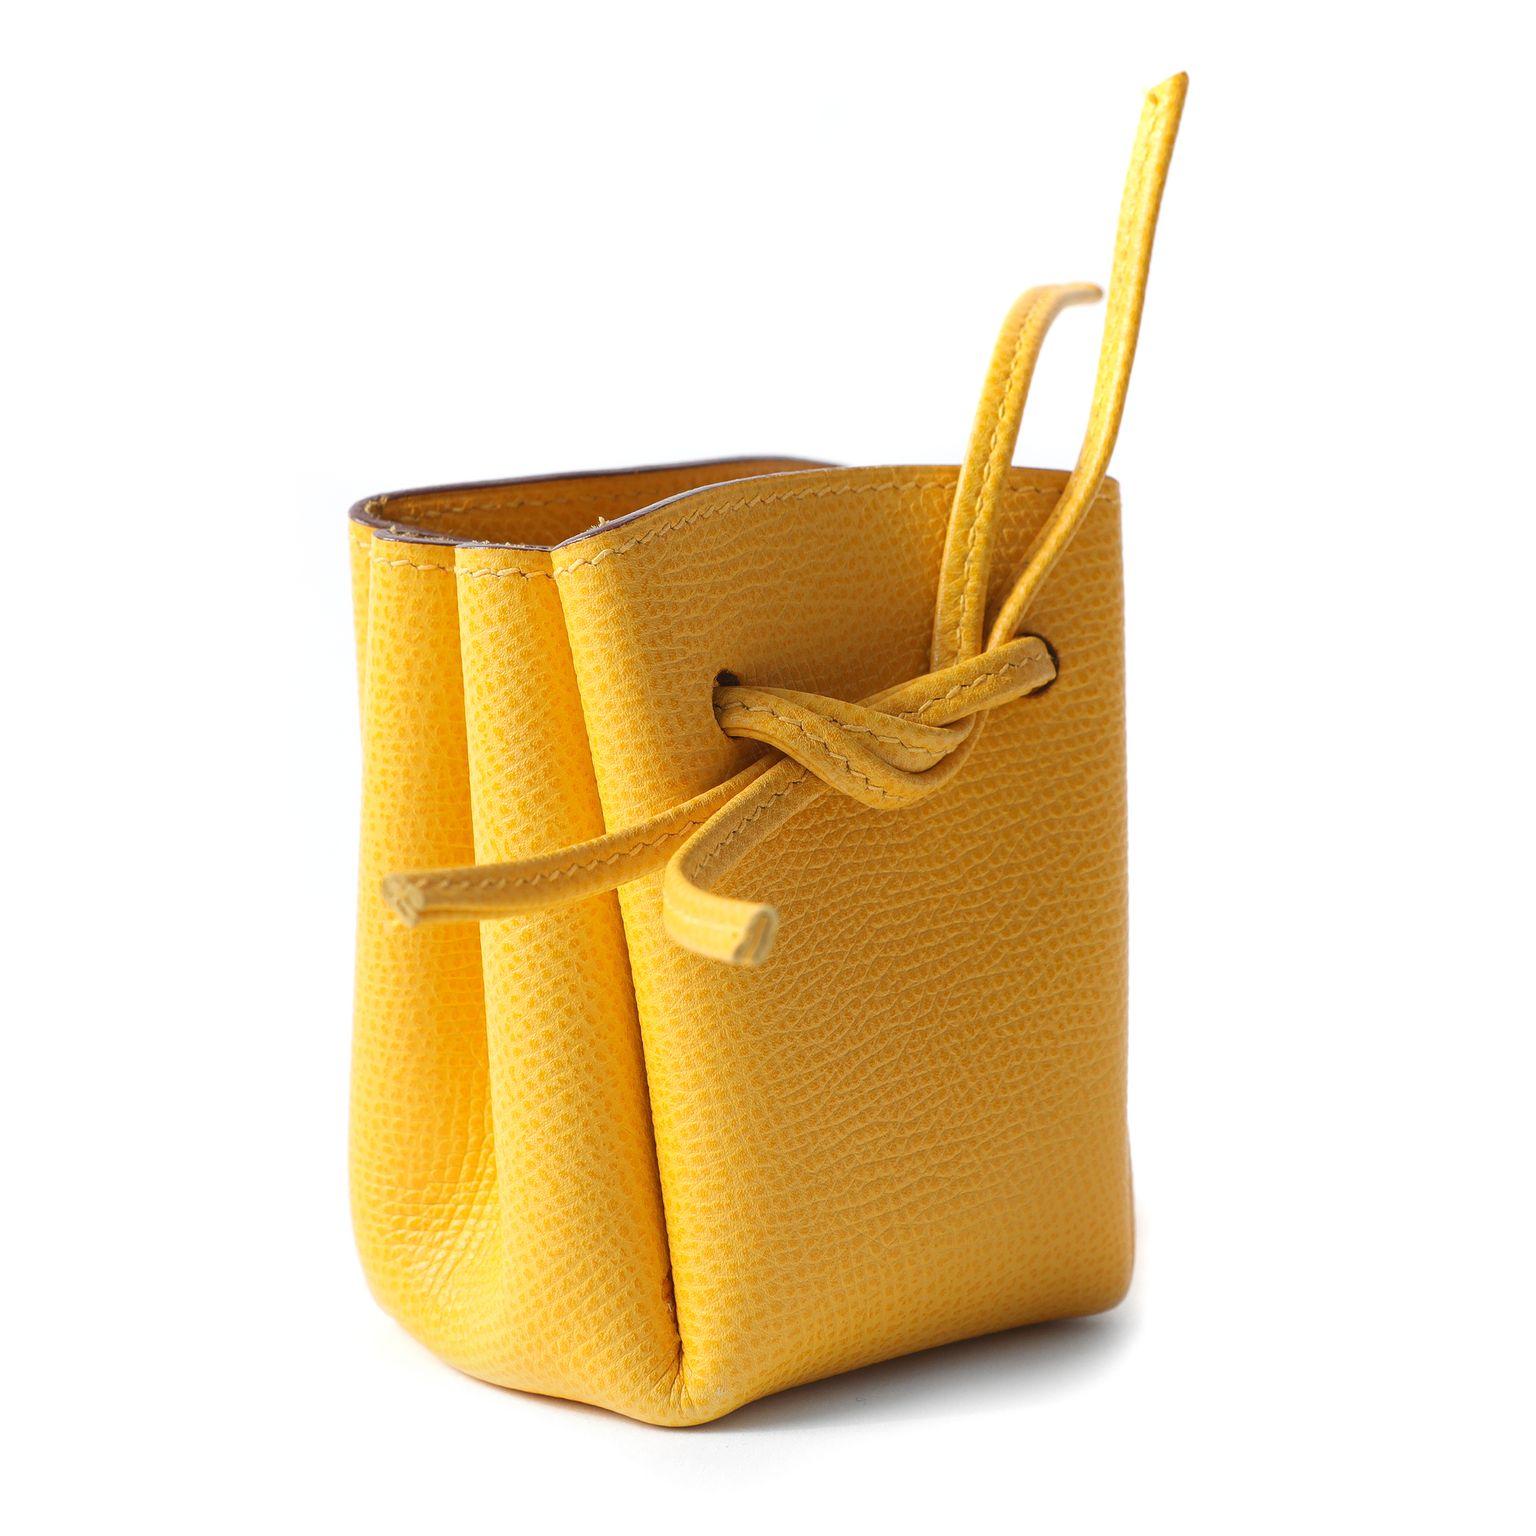 This authentic Hermès Soufre Yellow Epsom Vespa Pouch is in pristine condition.  Adorably dangles from a bag or tossed inside, this cheerful little accessory is a great gift.  Made in France. 

Measurements:  3.5” x 3.75” x 2.25” 

PBF 12353